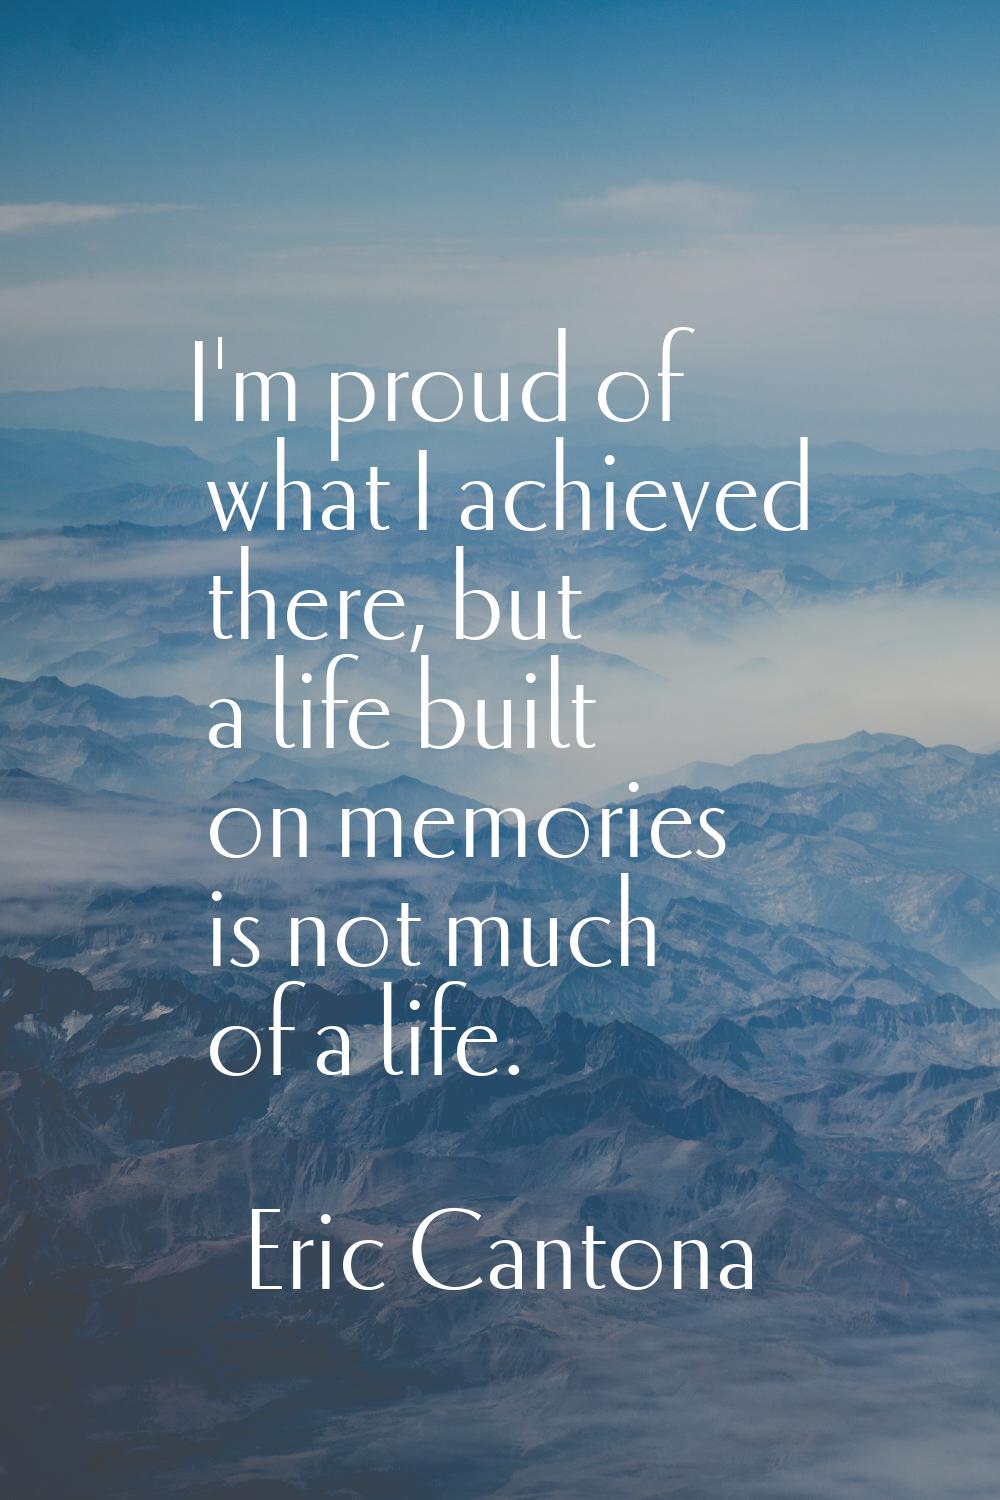 I'm proud of what I achieved there, but a life built on memories is not much of a life.